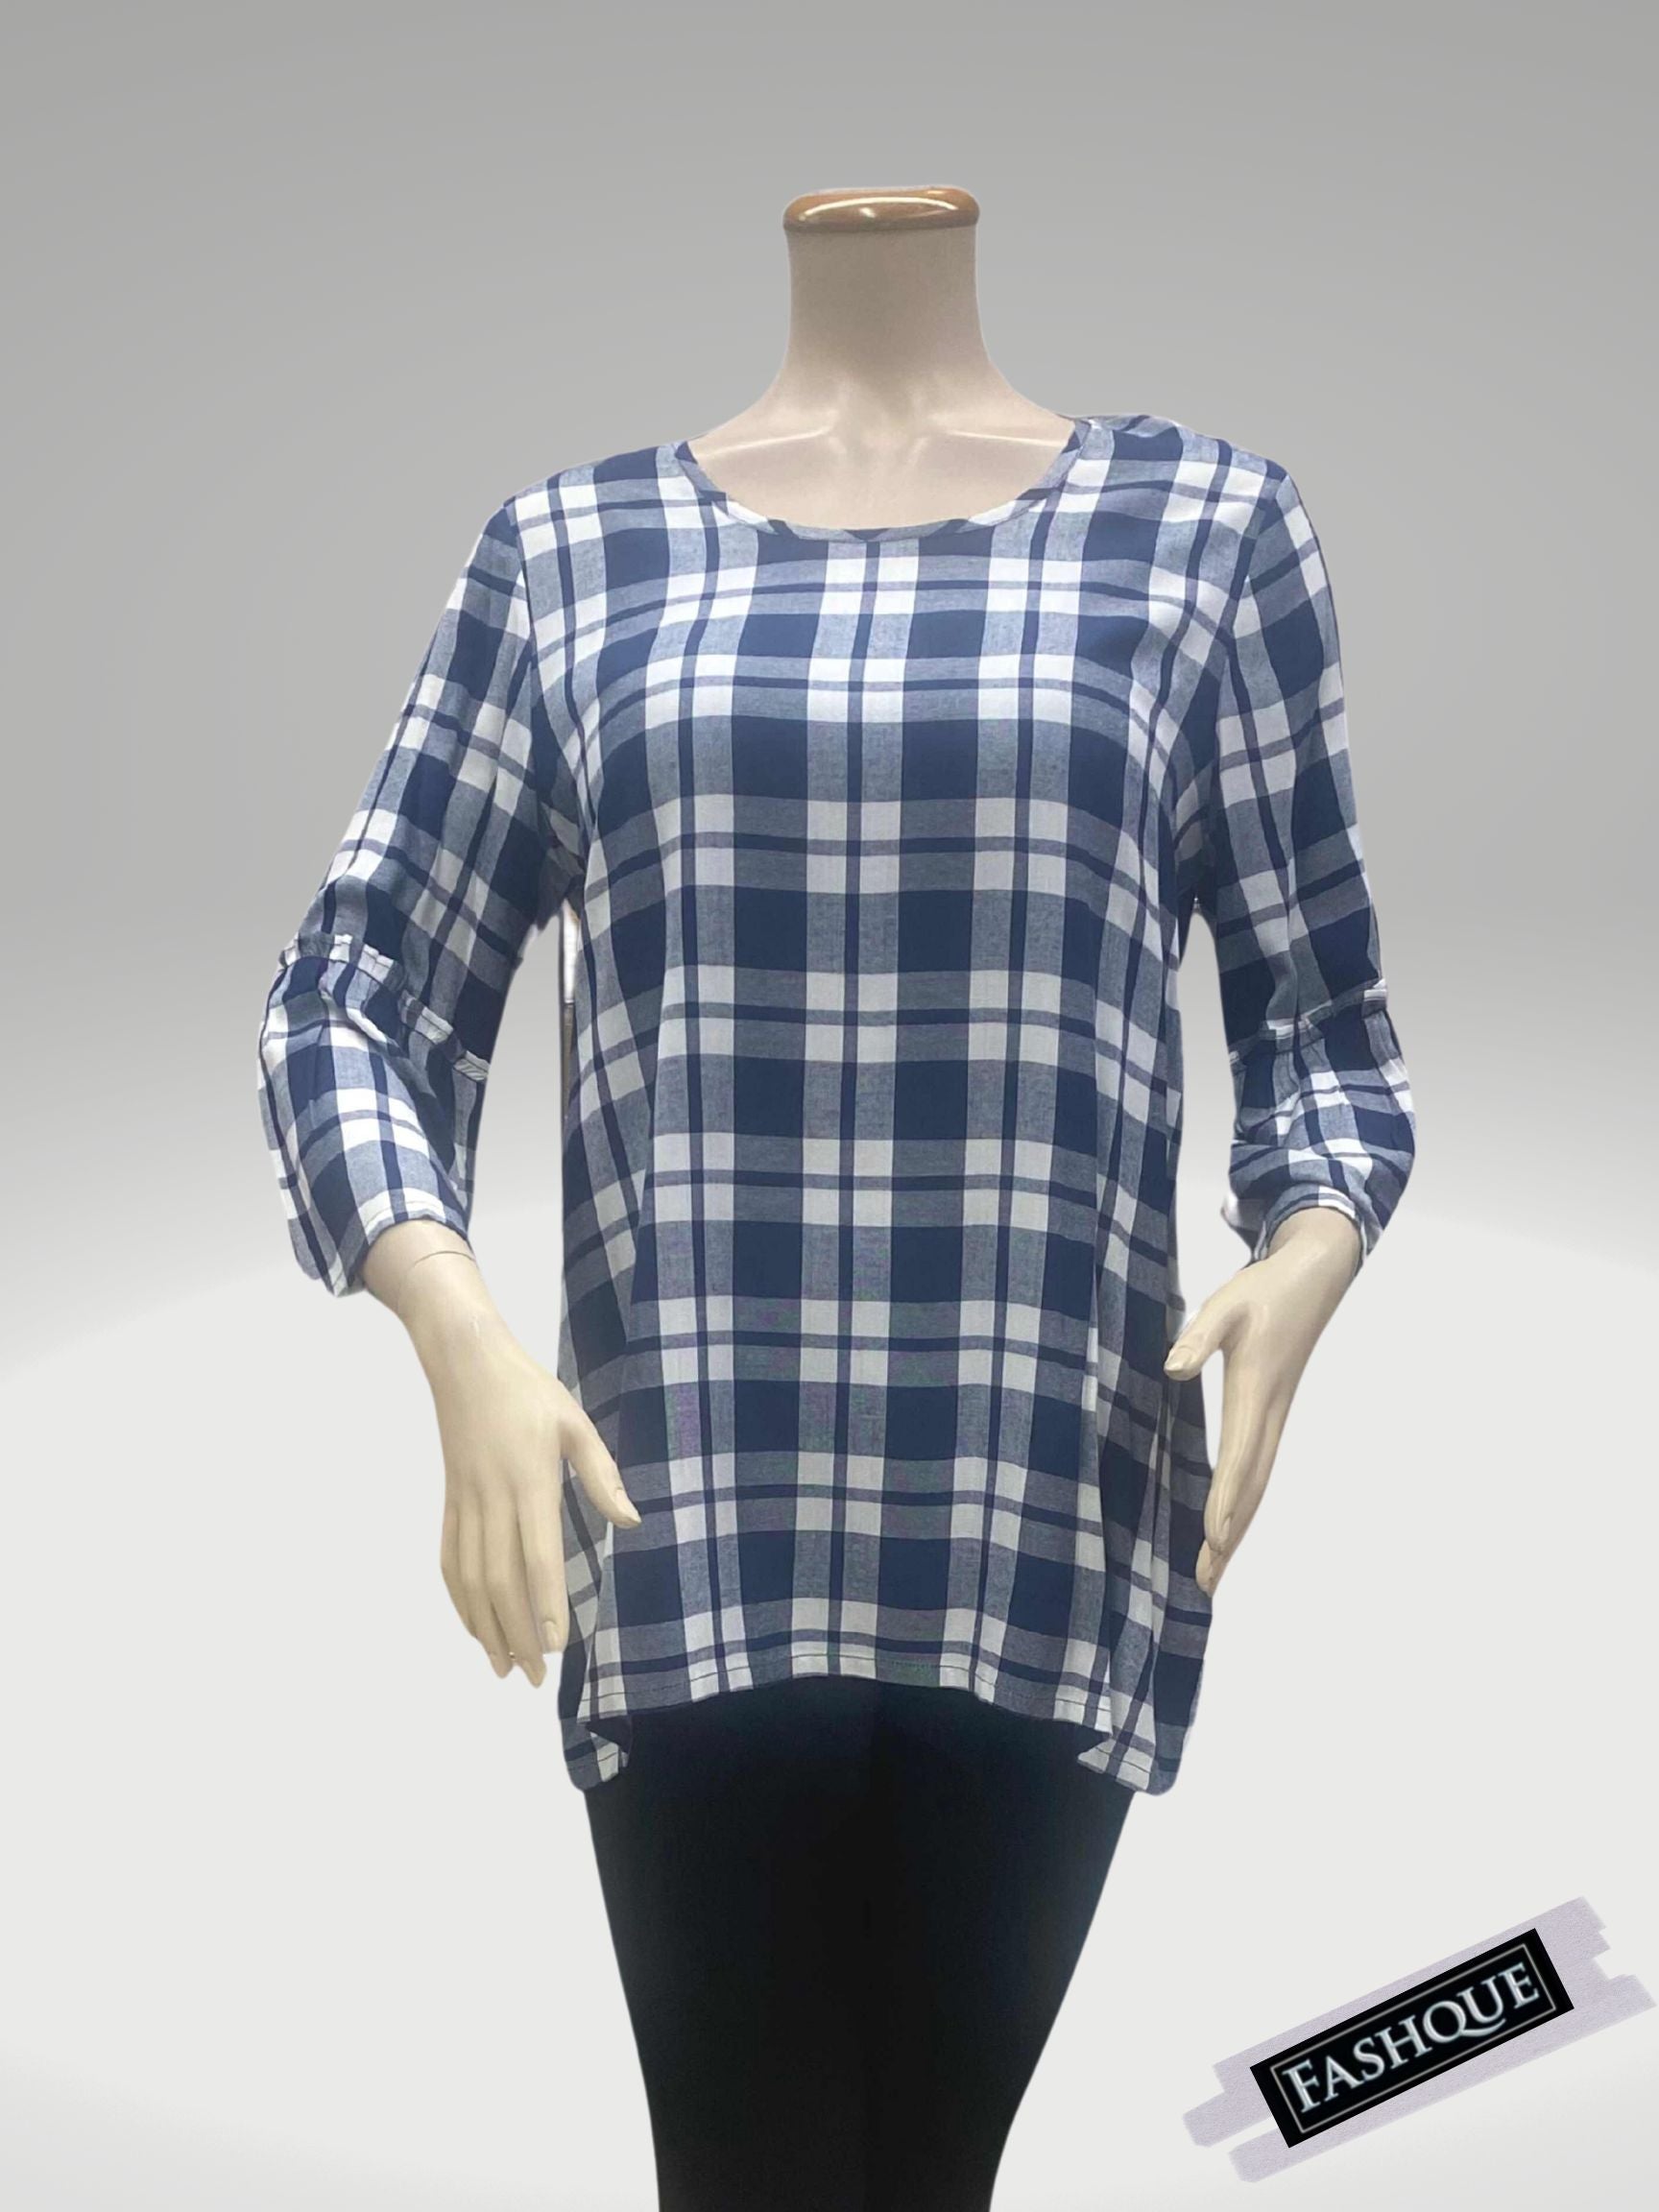 FASHQUE - BOAT NECK 3/4 Bell SLEEVE CHECKS TOP - T706